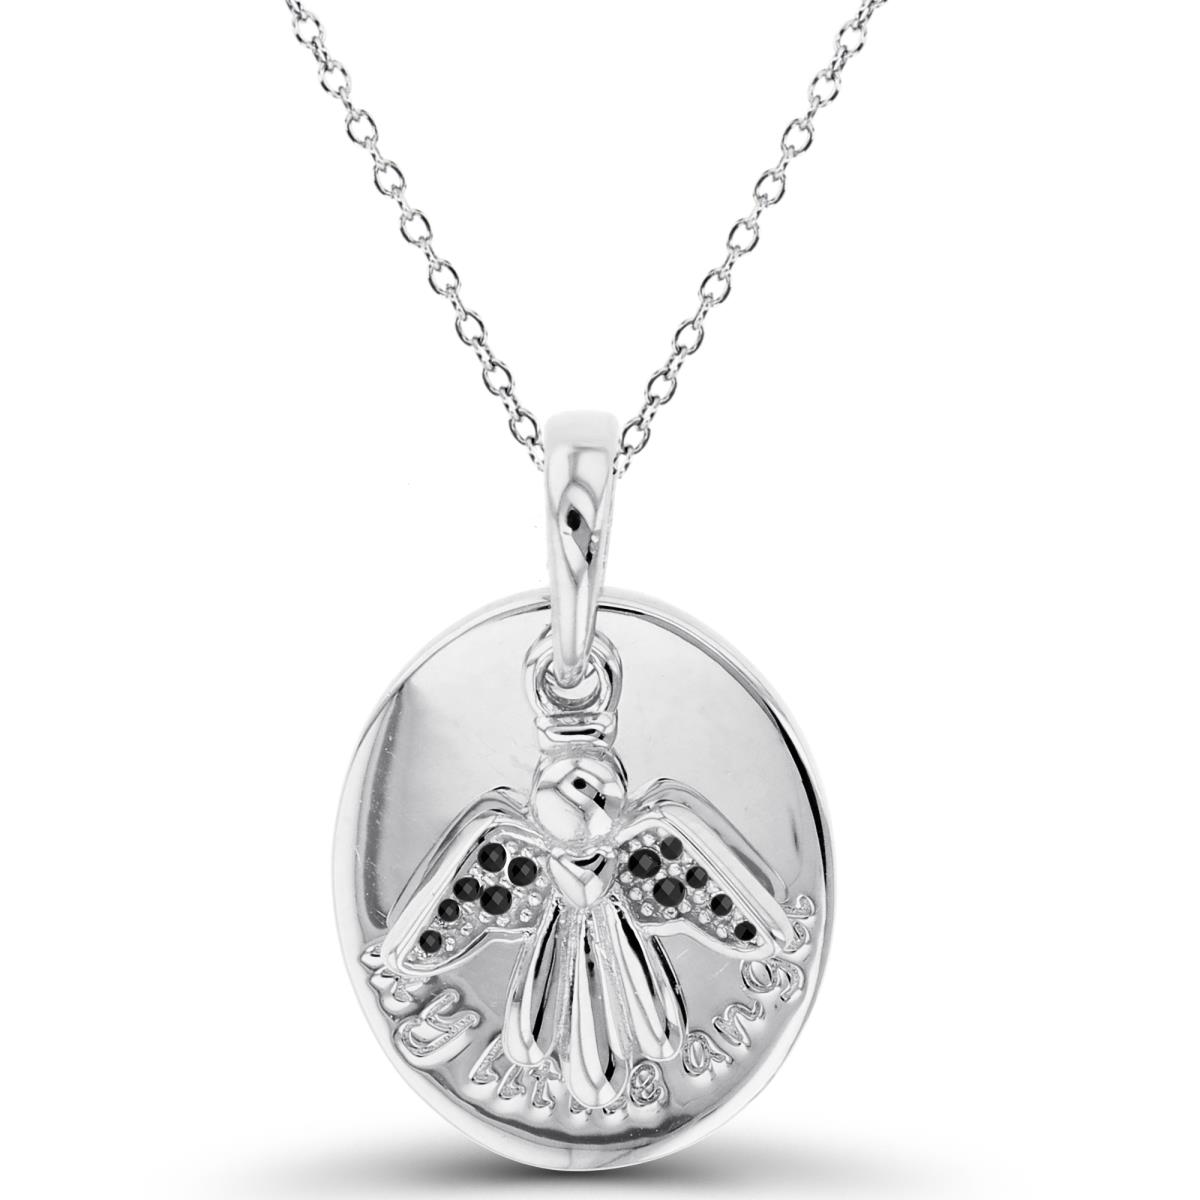 Sterling Silver Two-Tone High Polish Engraved Oval with DanglingTextured Rnd Black Spinel Angel 18"Necklace